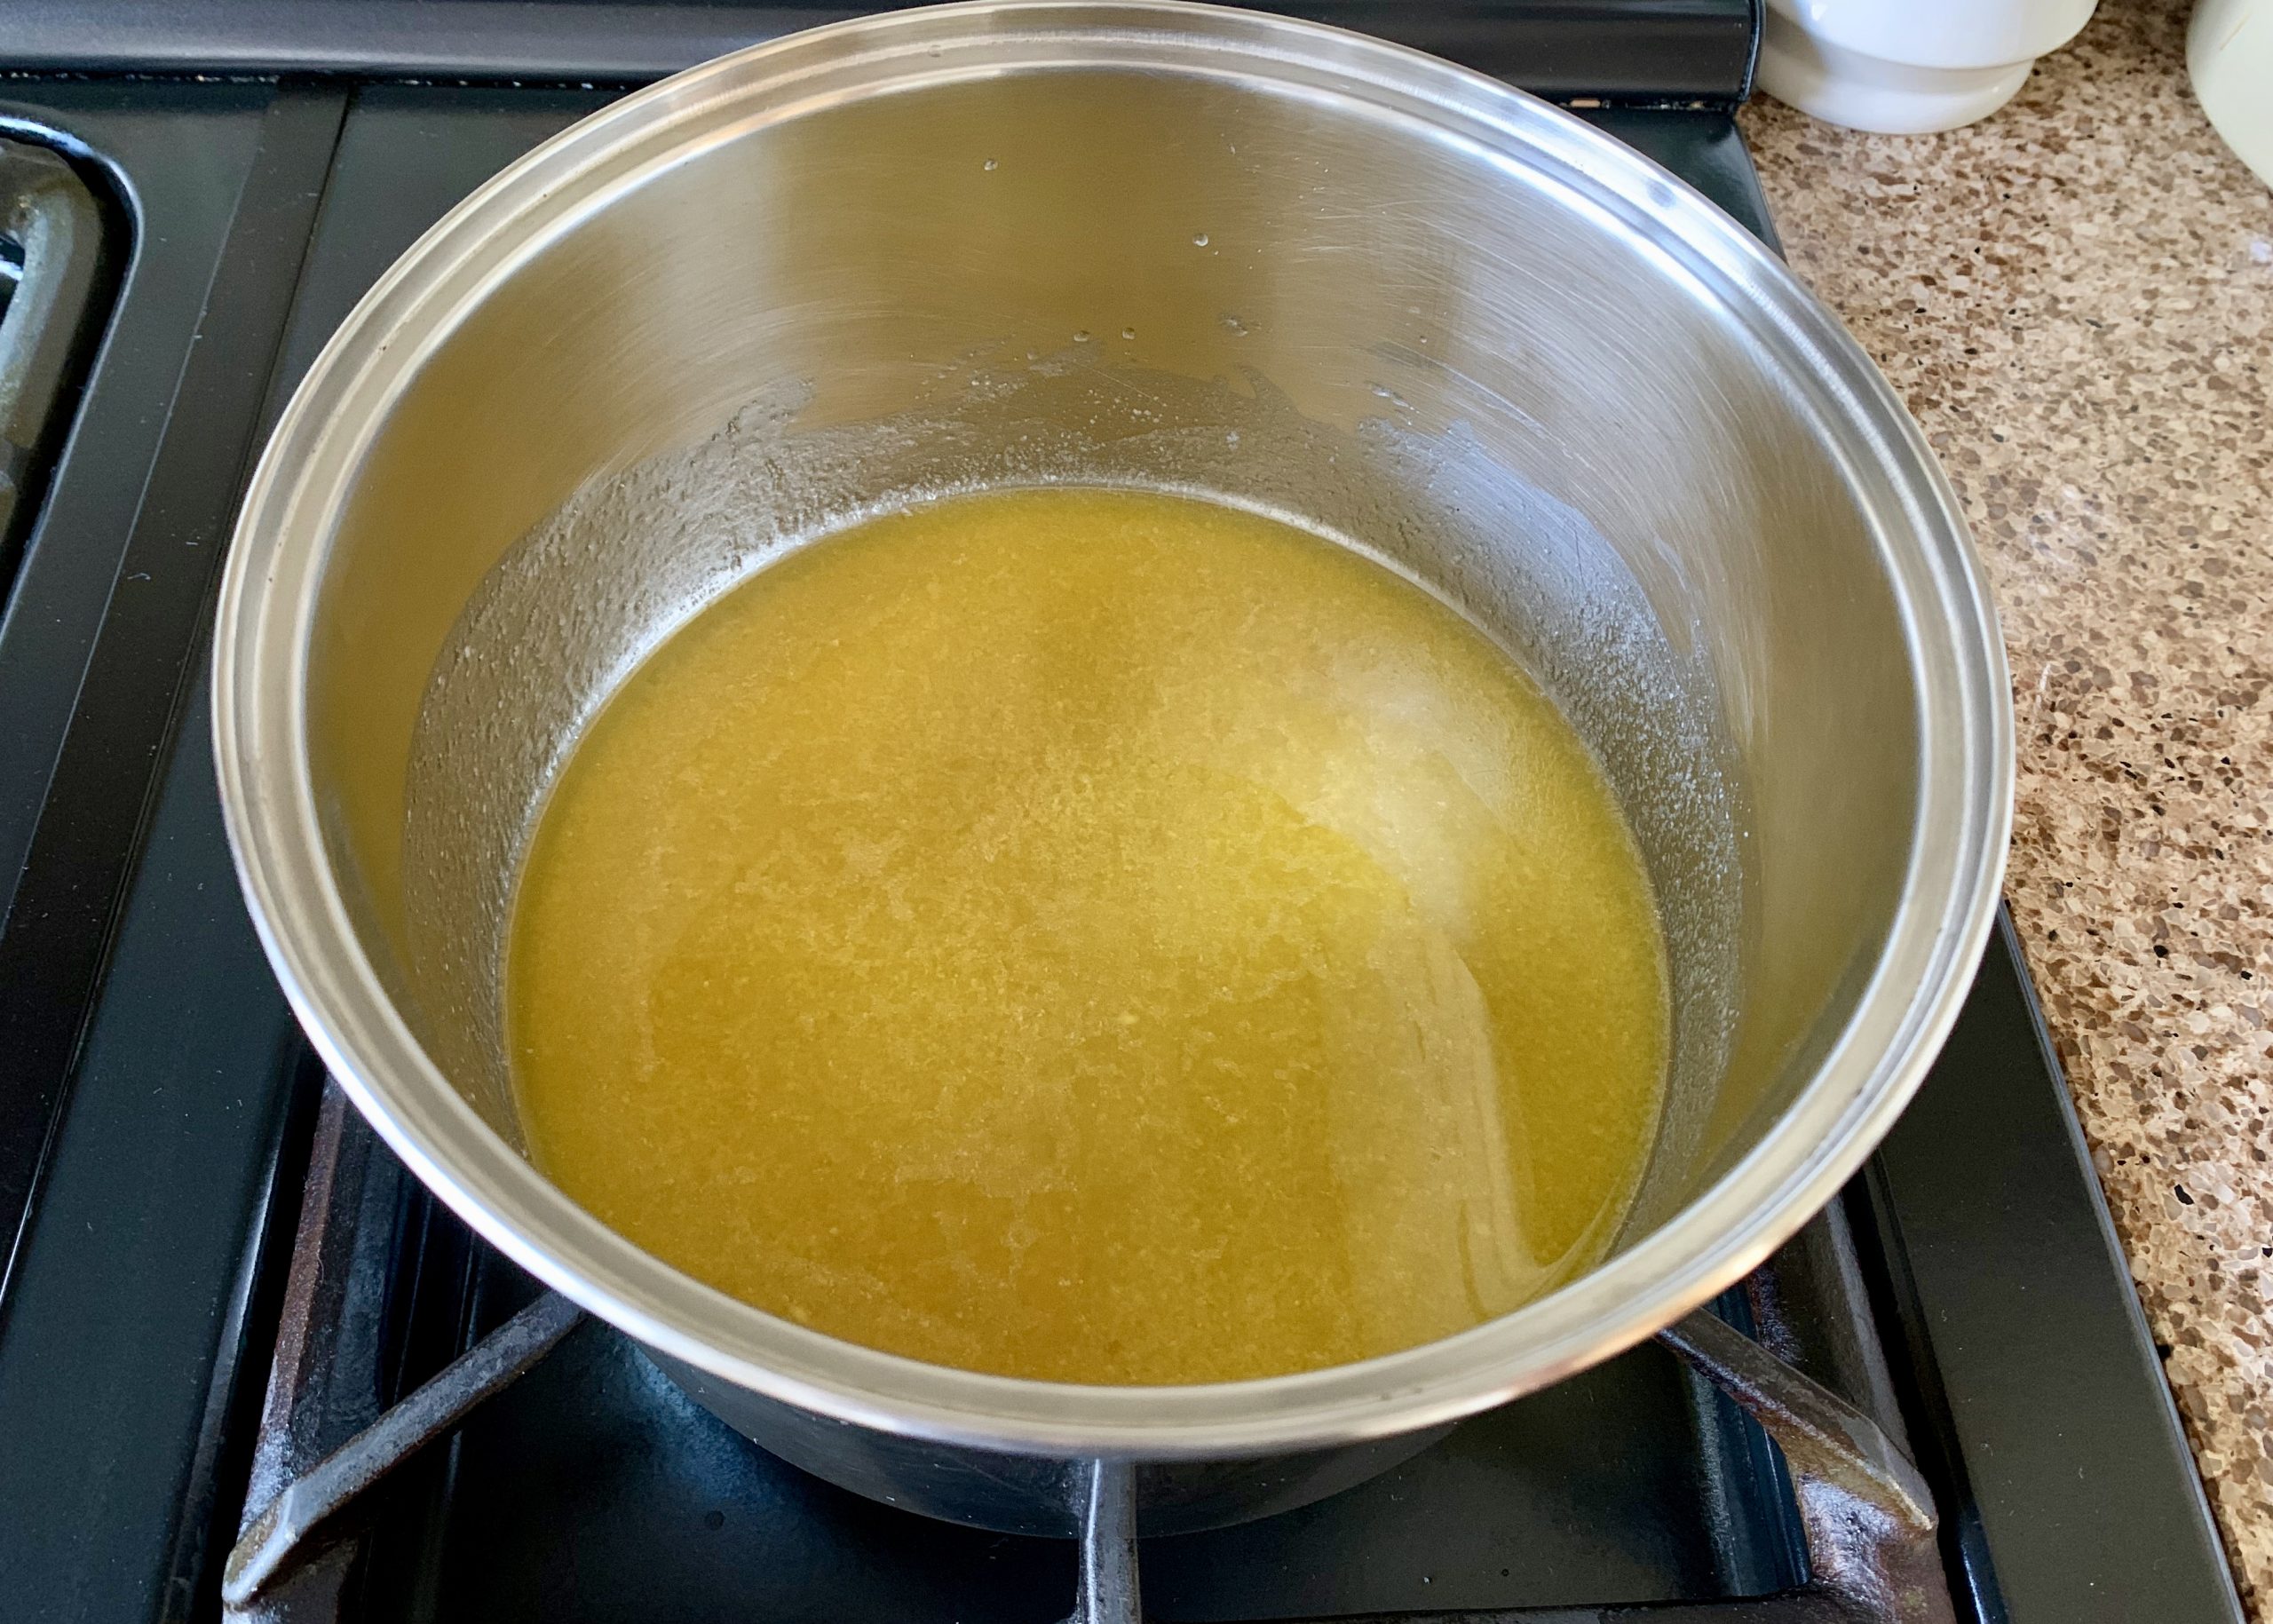 Melted syrup, butter and sugar in a pan